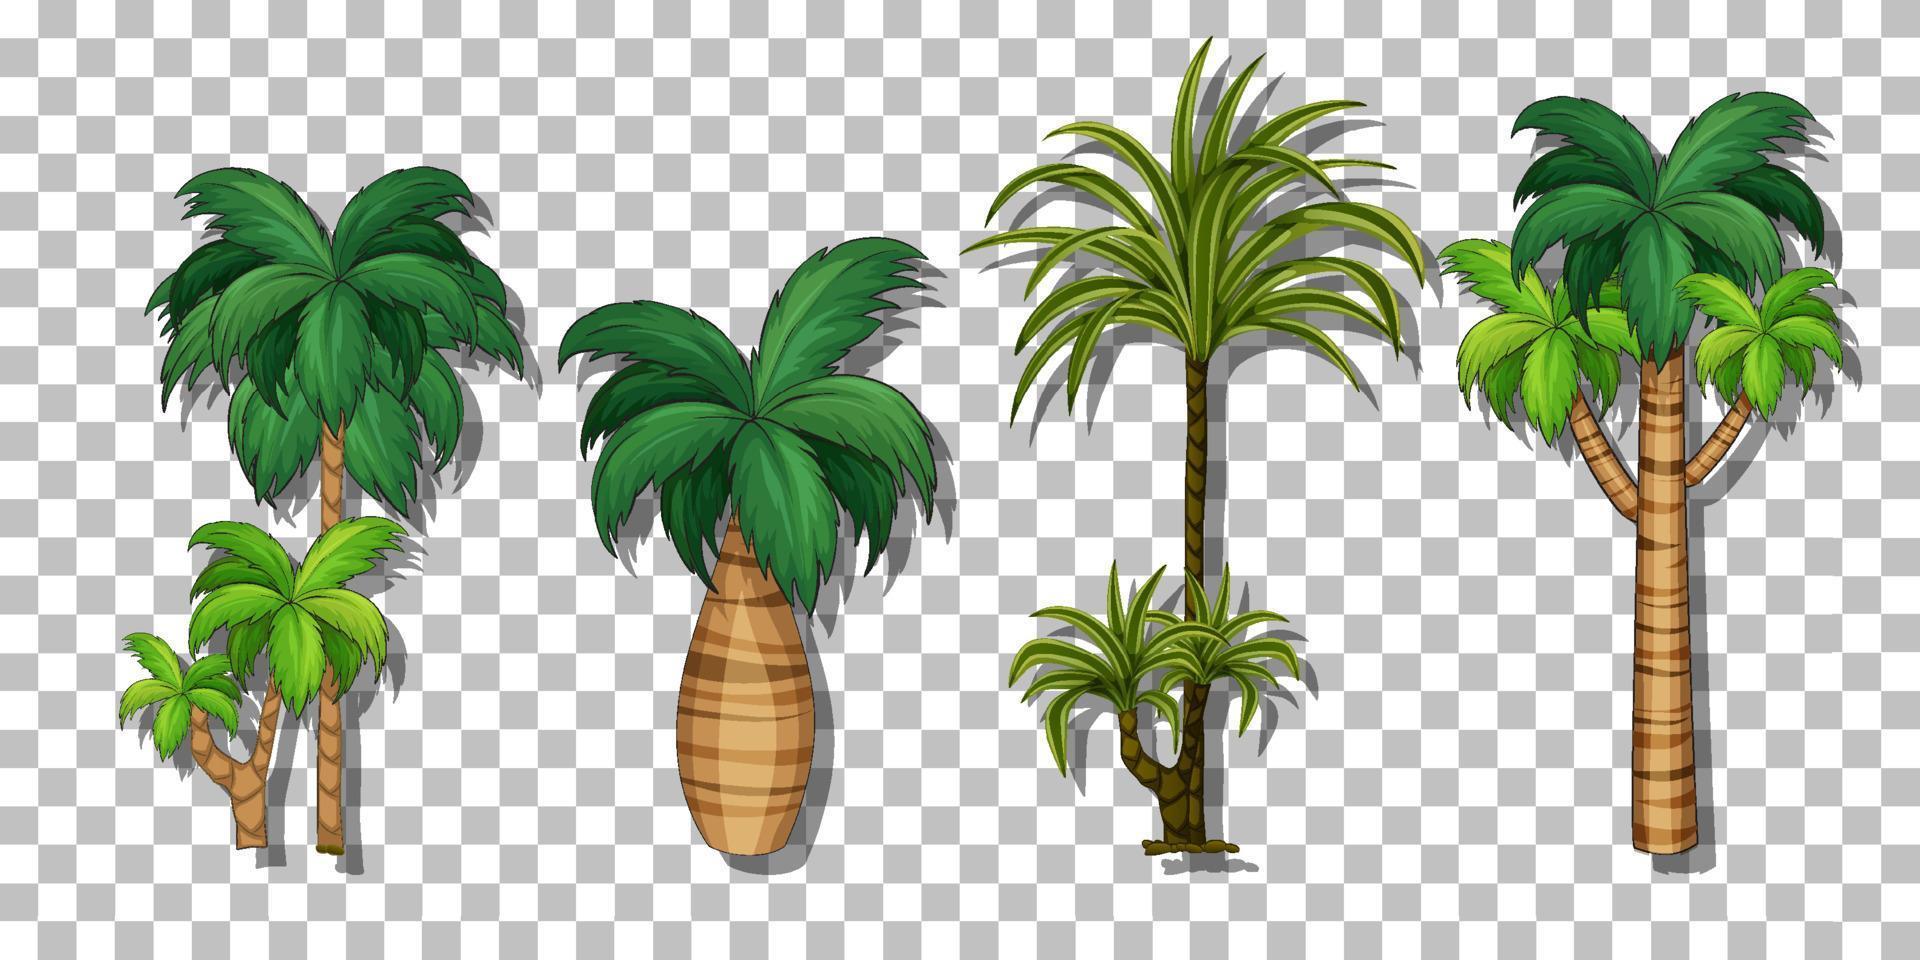 Palm tree on grid background vector